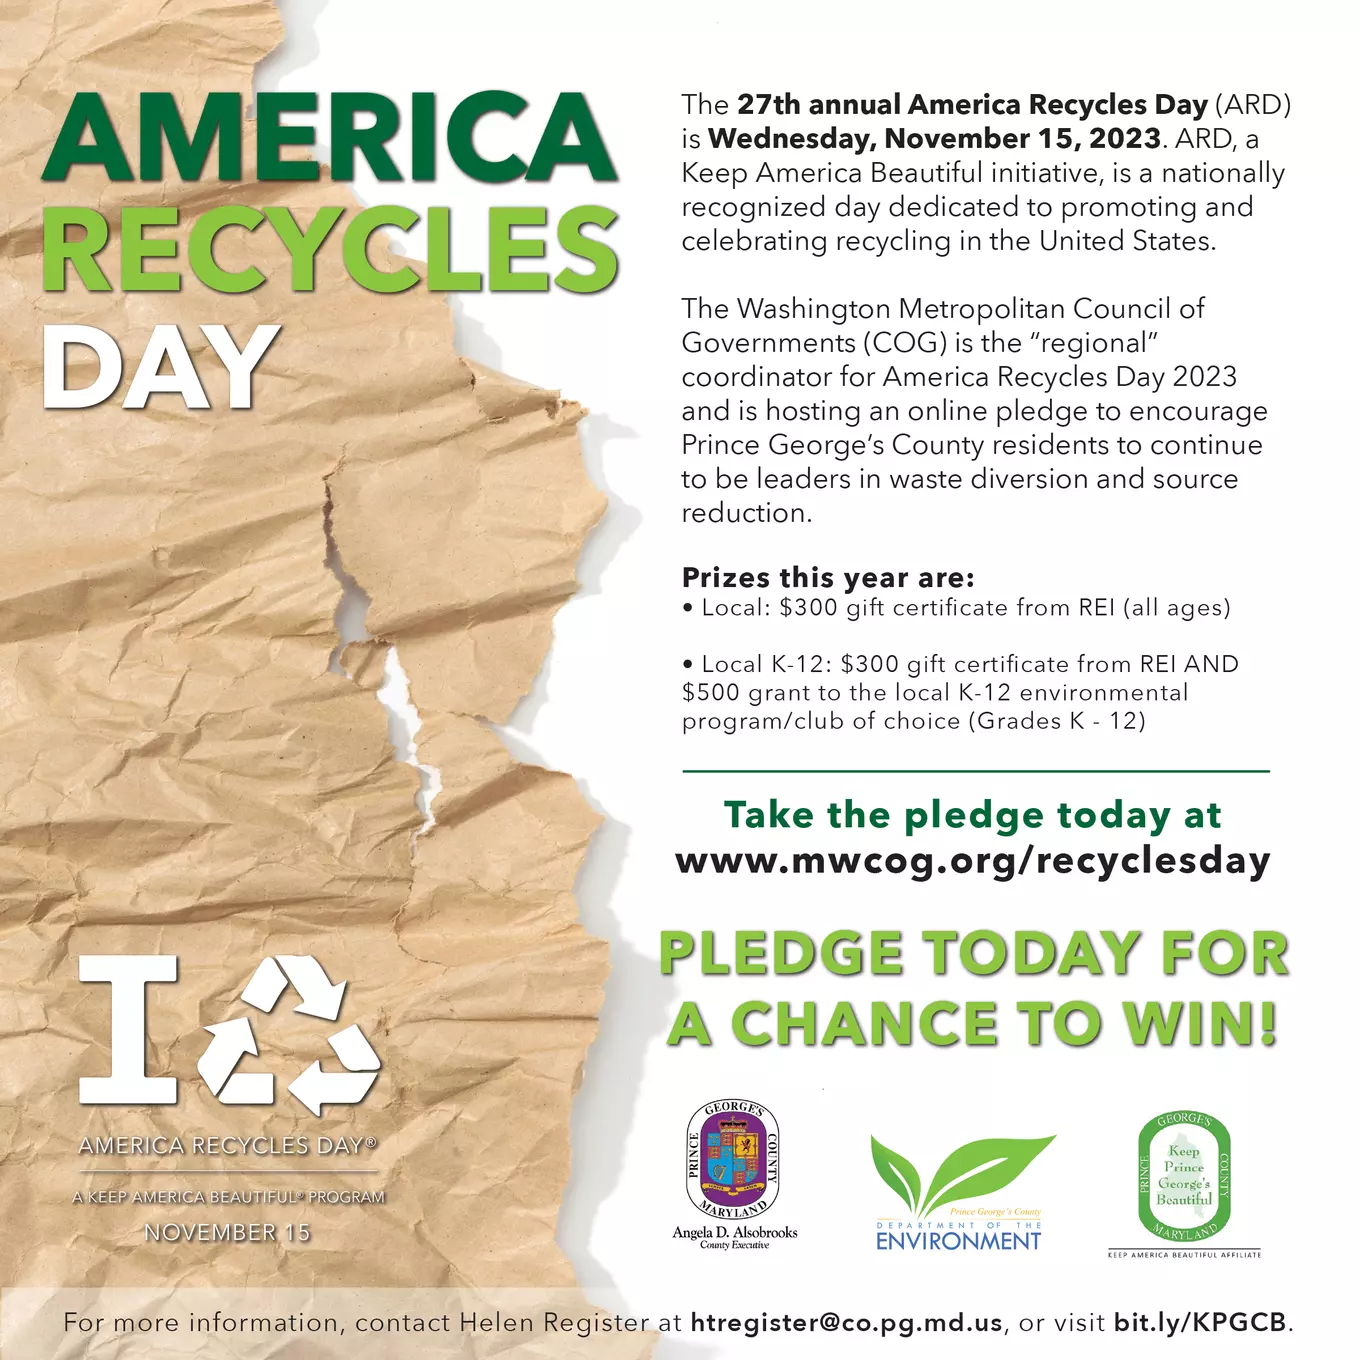 America Recycles Day (ARD) information about the pledge for 2023.